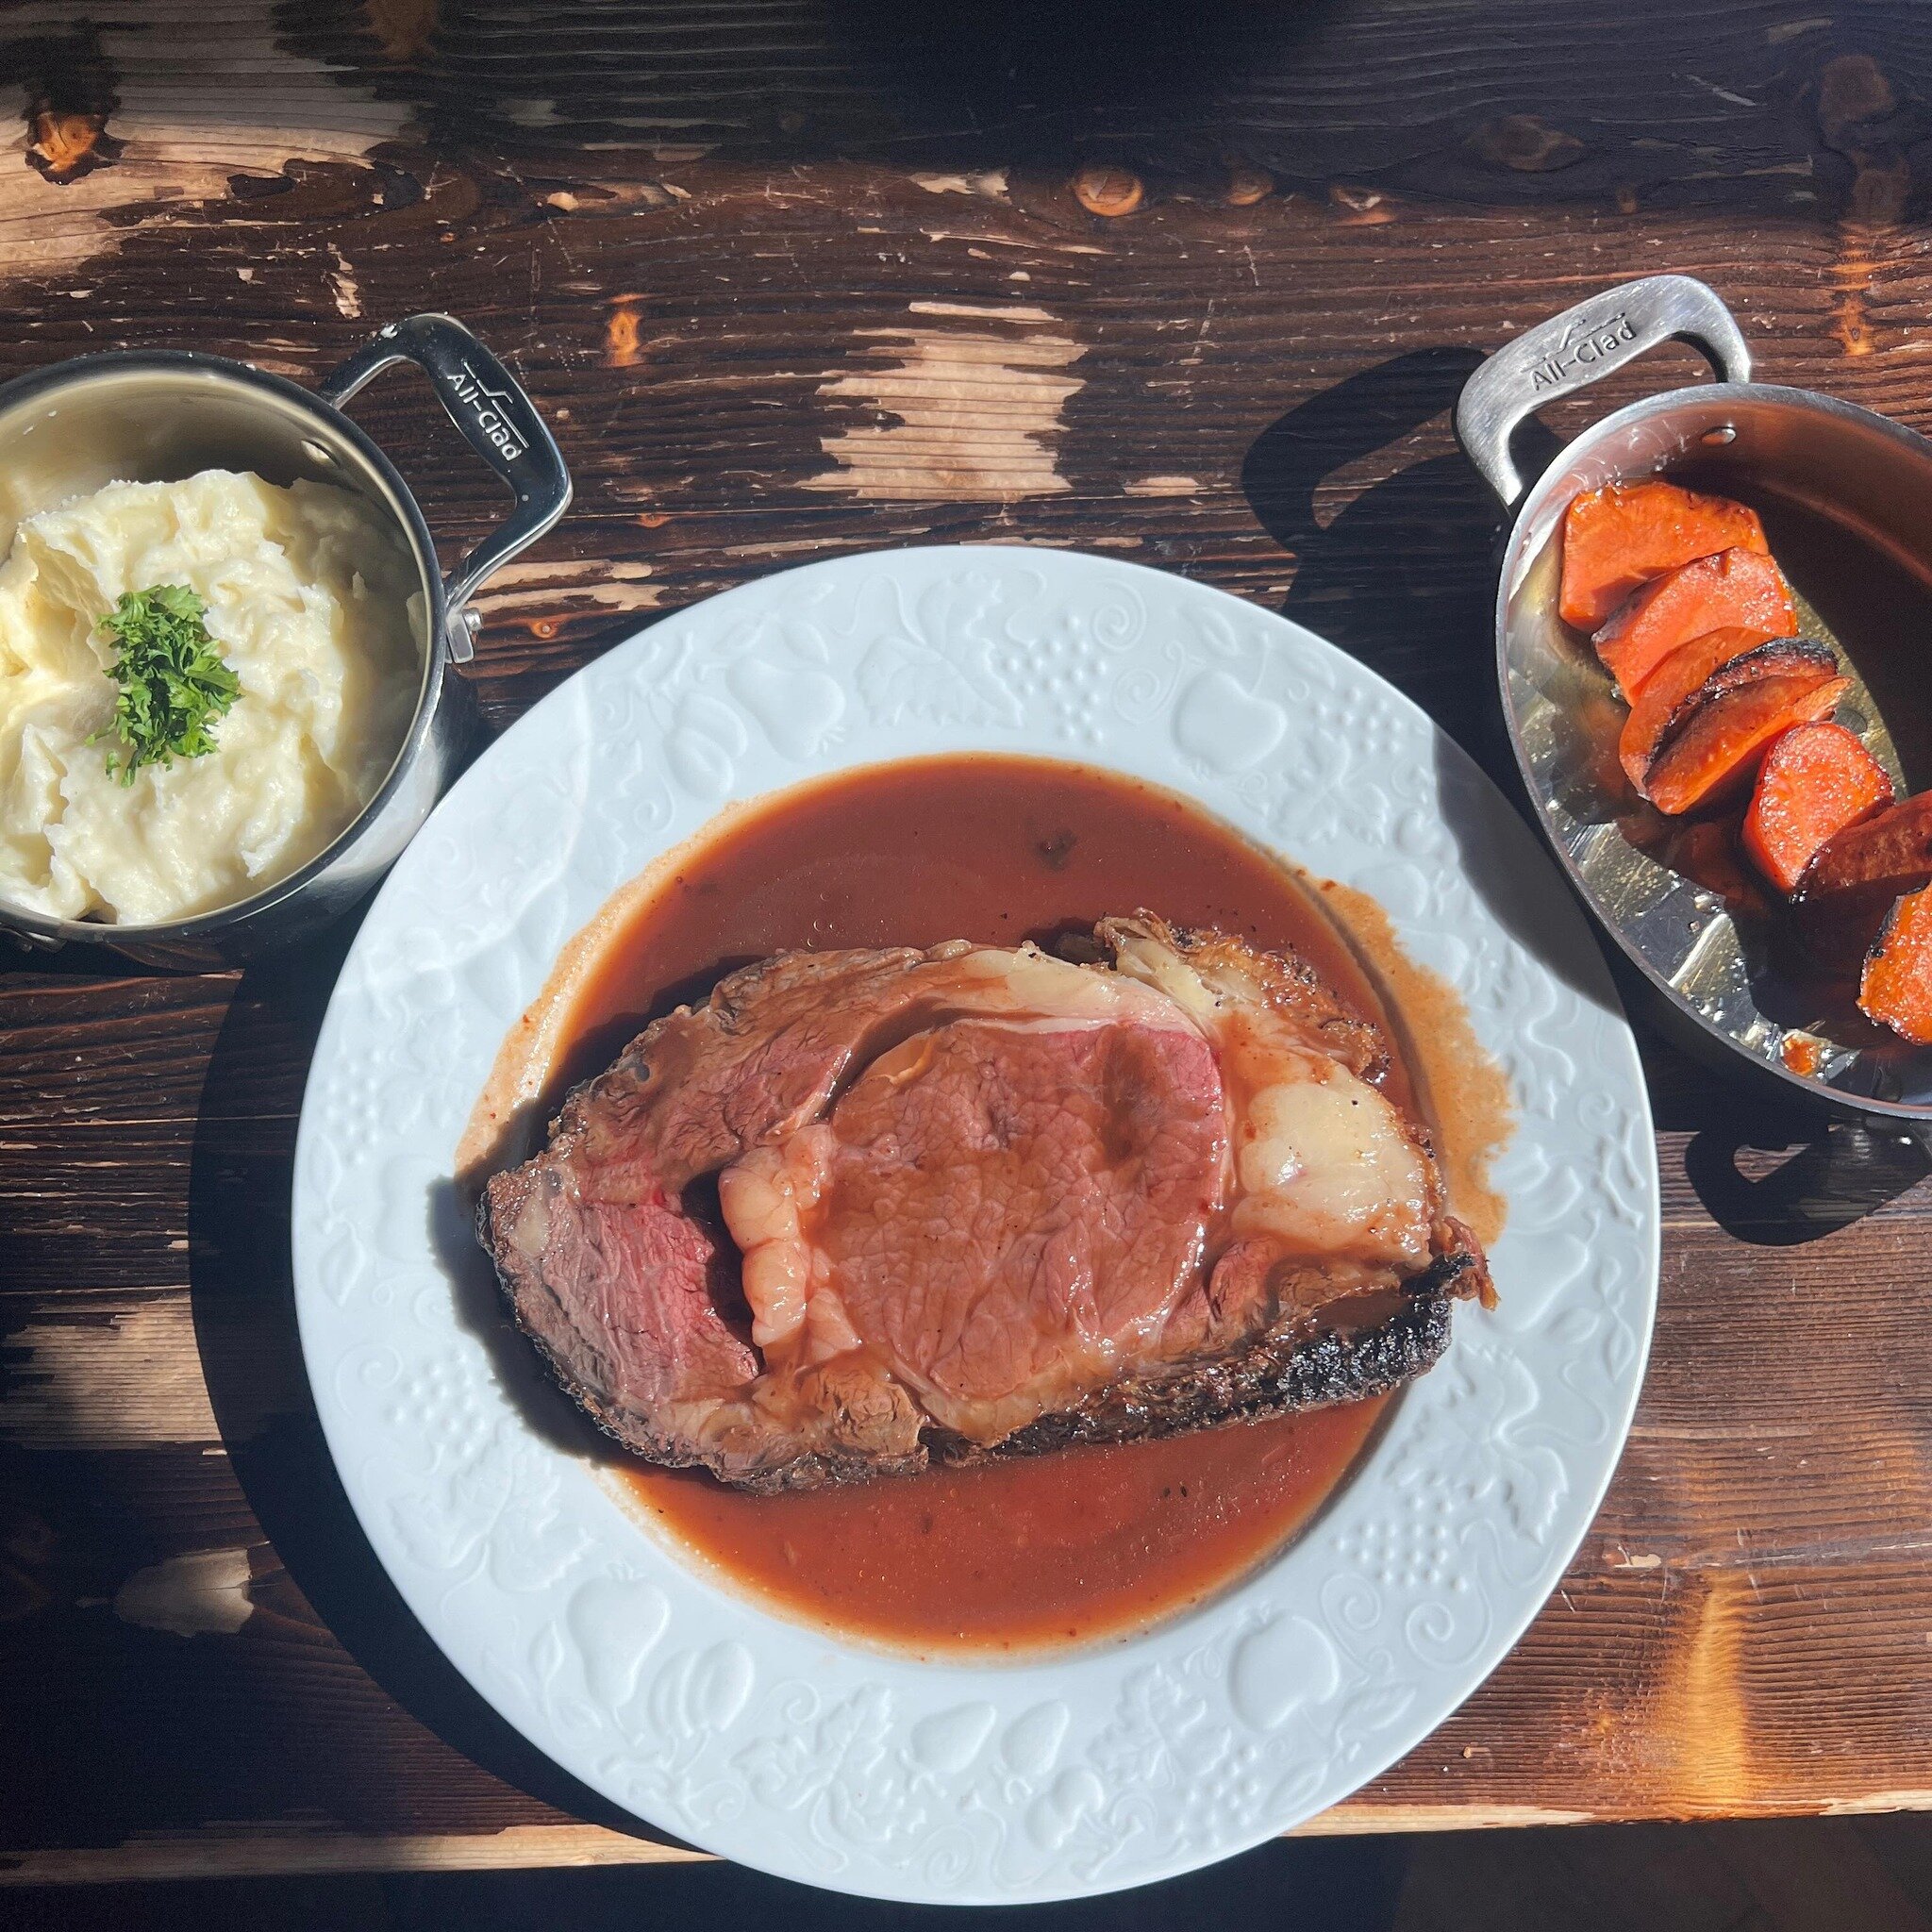 Every Wednesday is Prime Rib night at @patrickhenryswt .  In addition to our regular menu,  enjoy our delicious, slow cooked prime rib with a side of mashed potatoes, red wine au jus and vegetables.  Available in 12oz or 16 oz cuts.